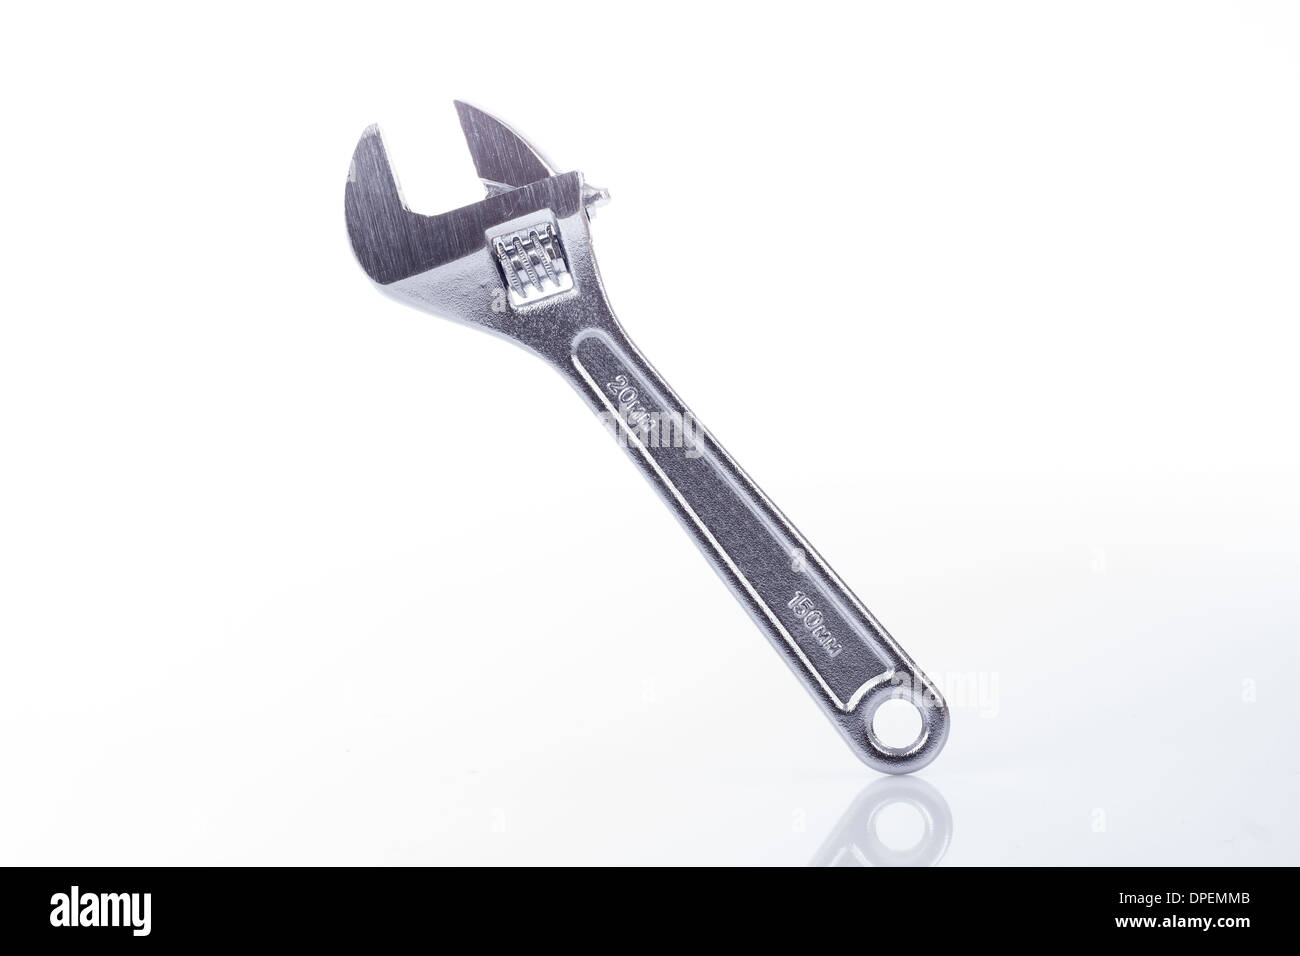 Adjustable wrench isolated on white Stock Photo